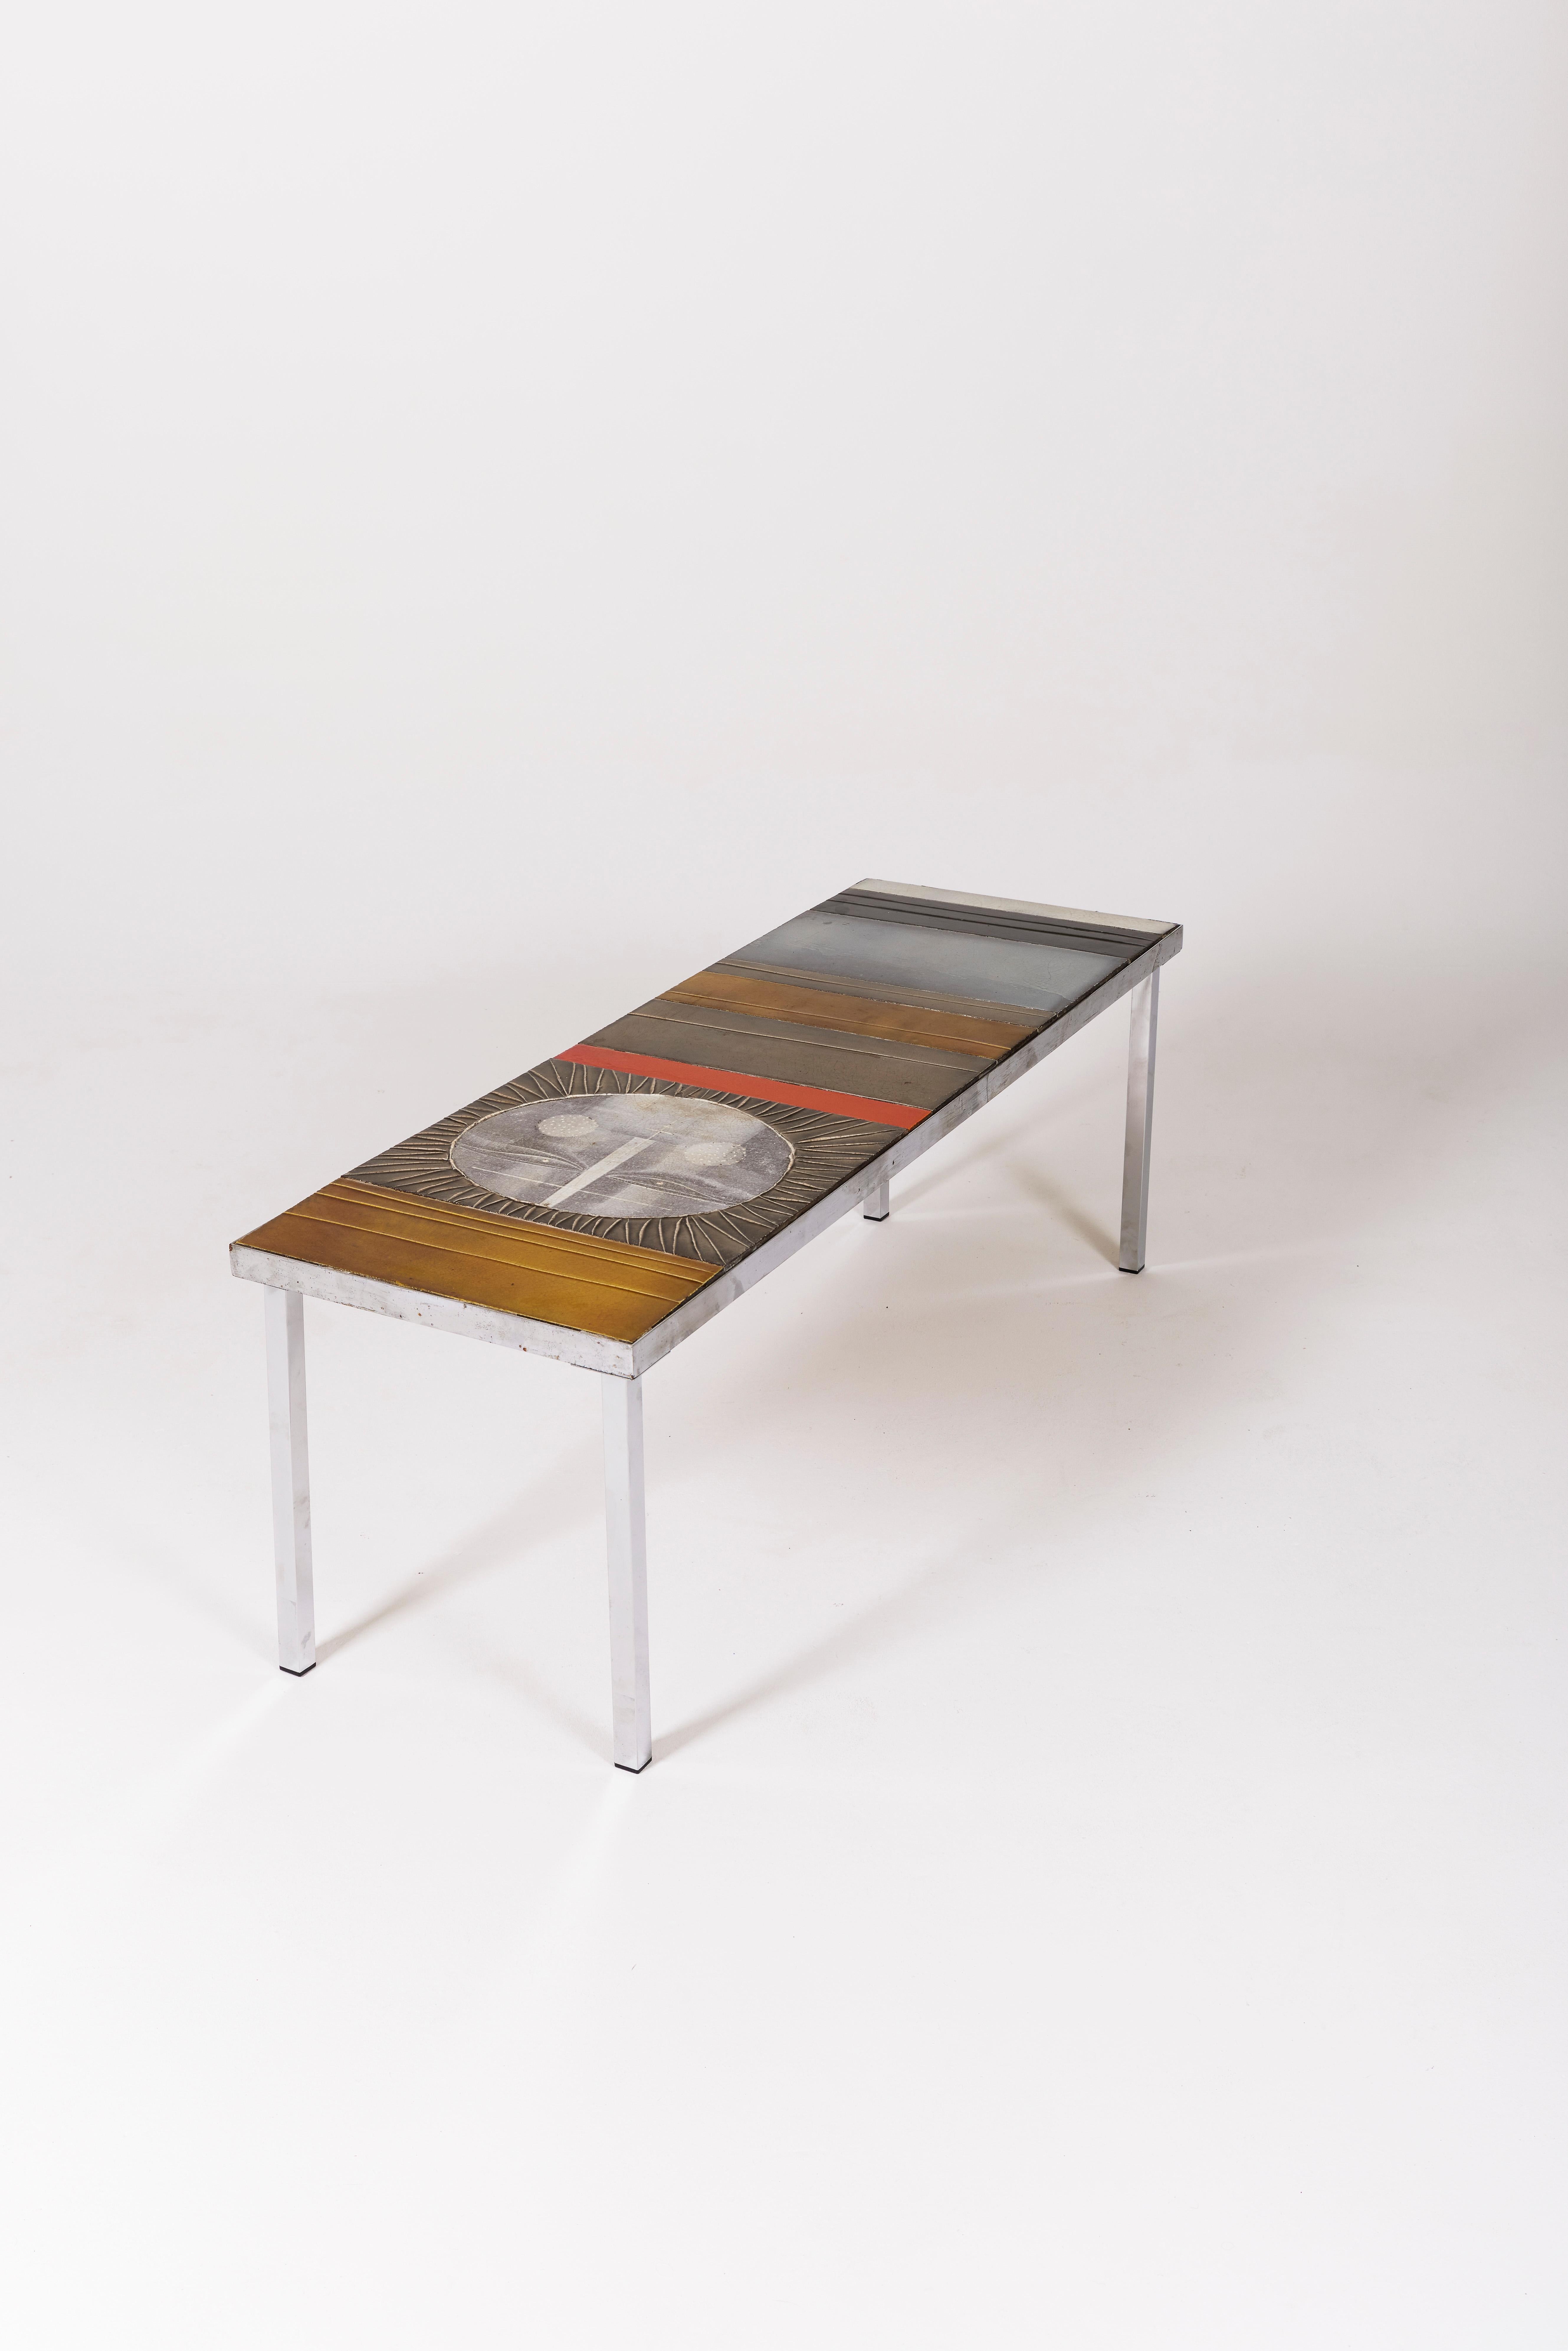 Ceramic coffee table by Roger Capron 1